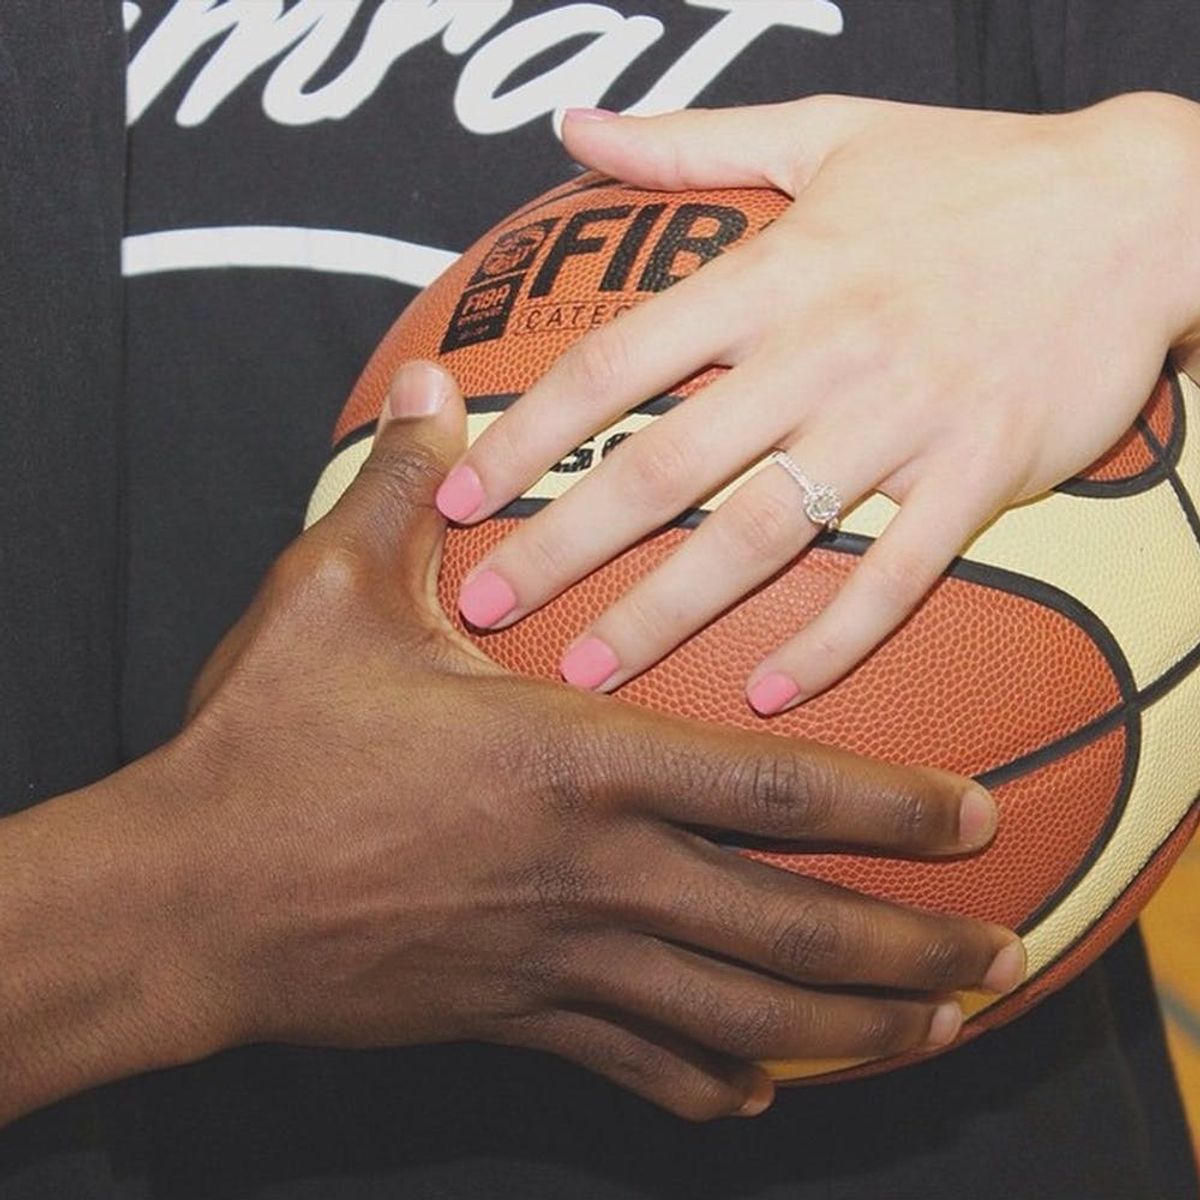 This Basketball Player’s Proposal Is Just the Cutest